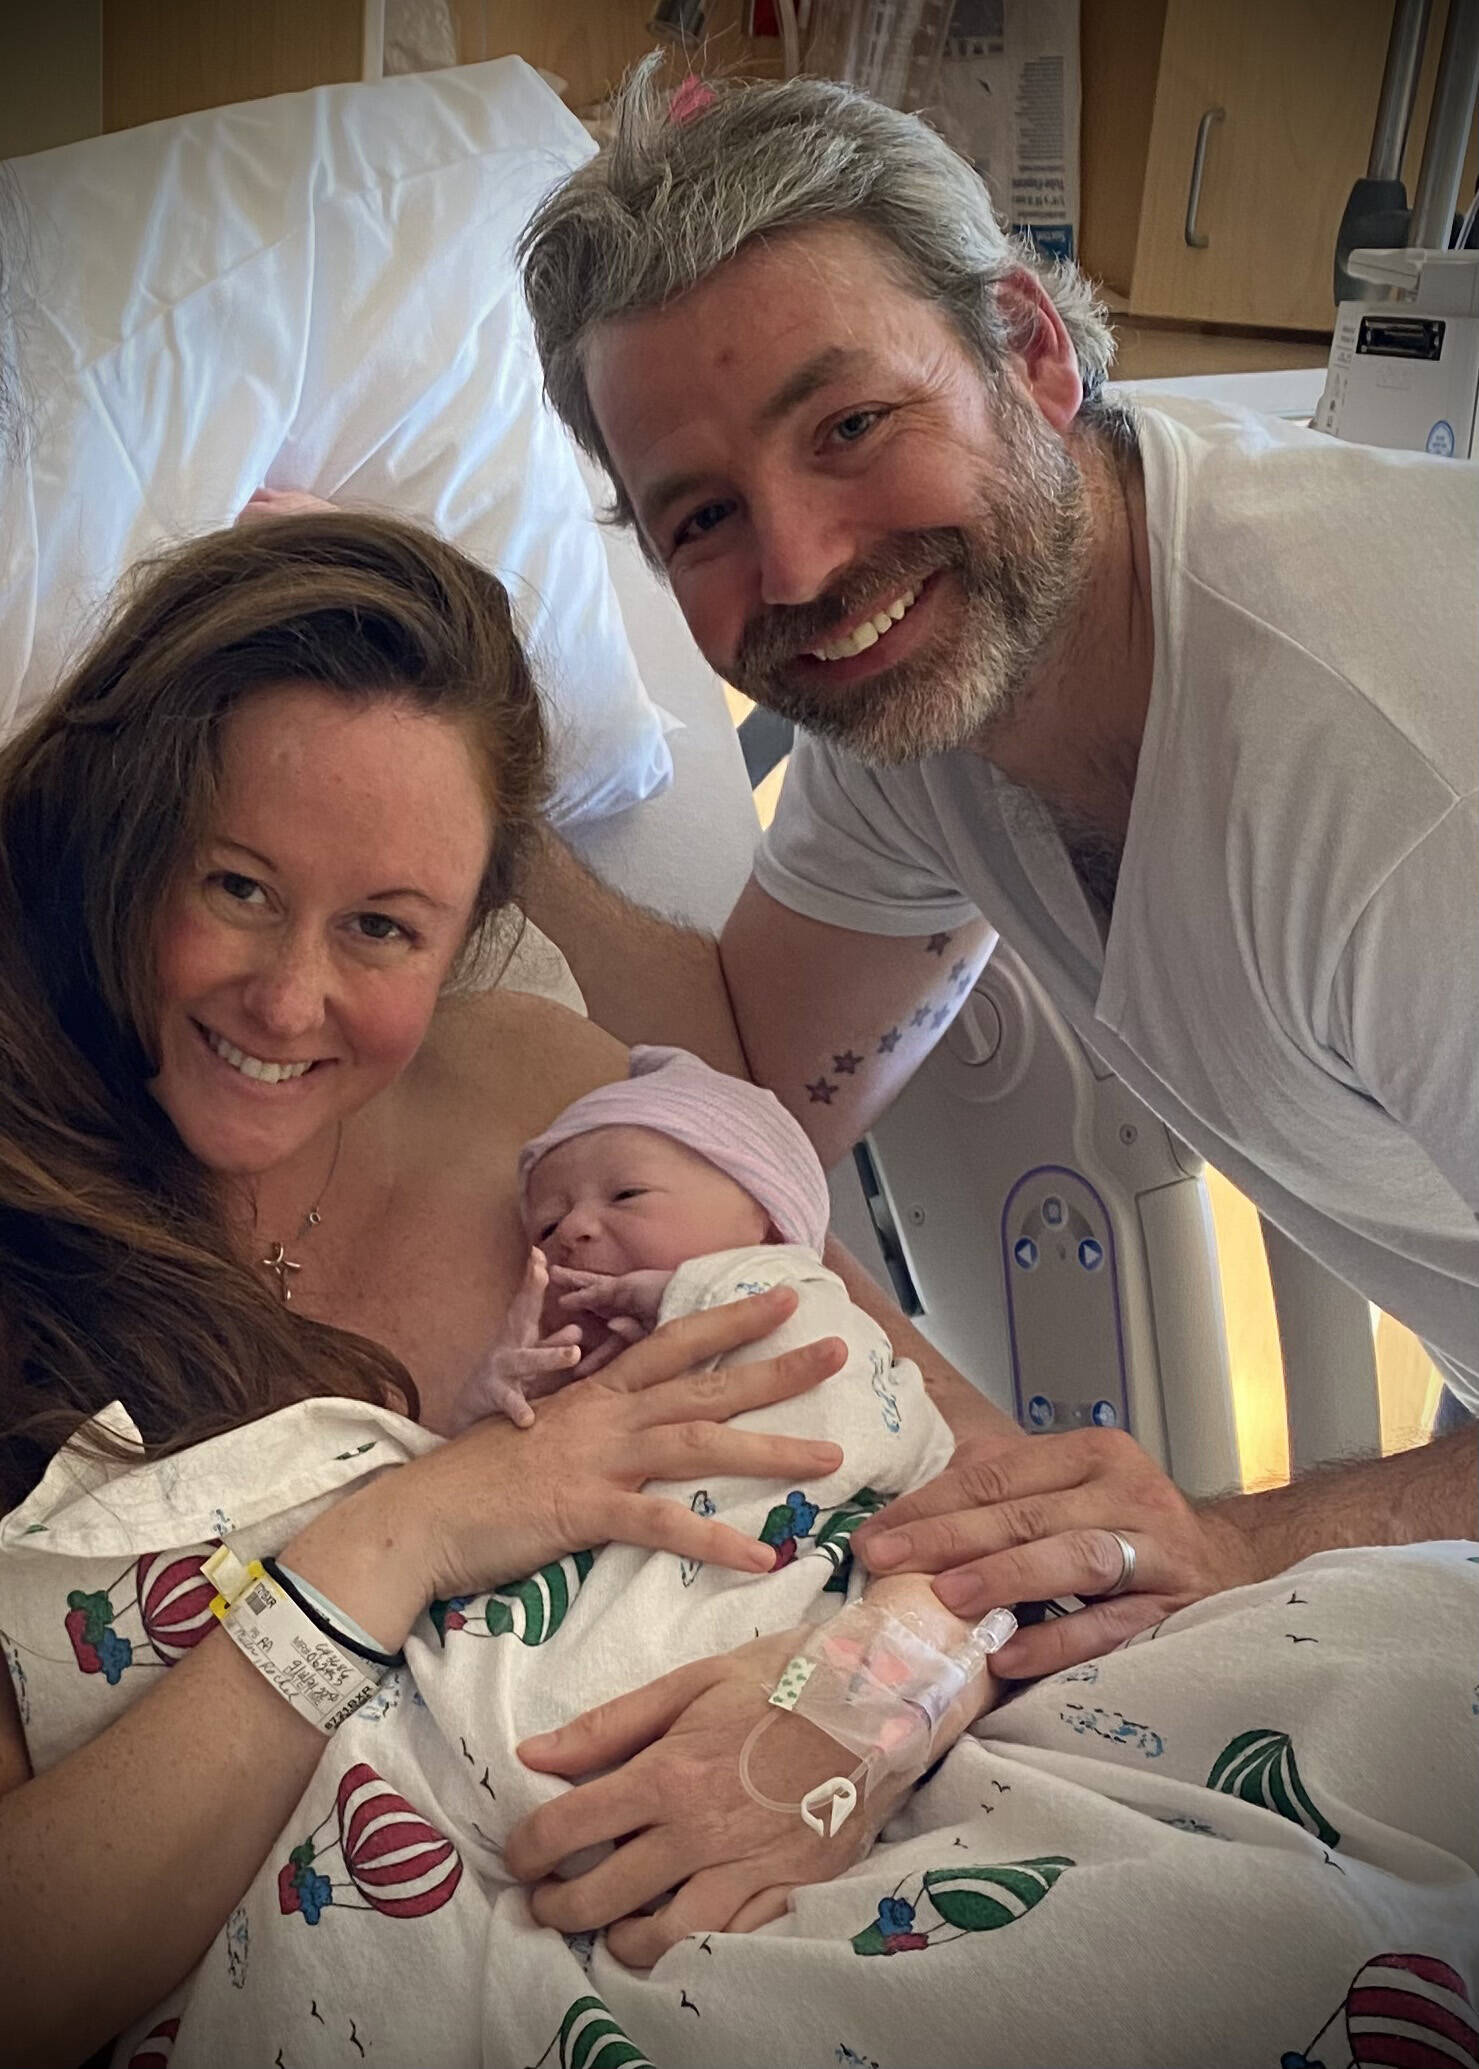 Rachel and Vernon Scott Miller celebrate the birth of their son Tripp Woodruff Miller, who was born on Sept. 19, 2021. Tripp Miller is the first baby born from IVF treatments in Homer. (Photo provided by Miller family)